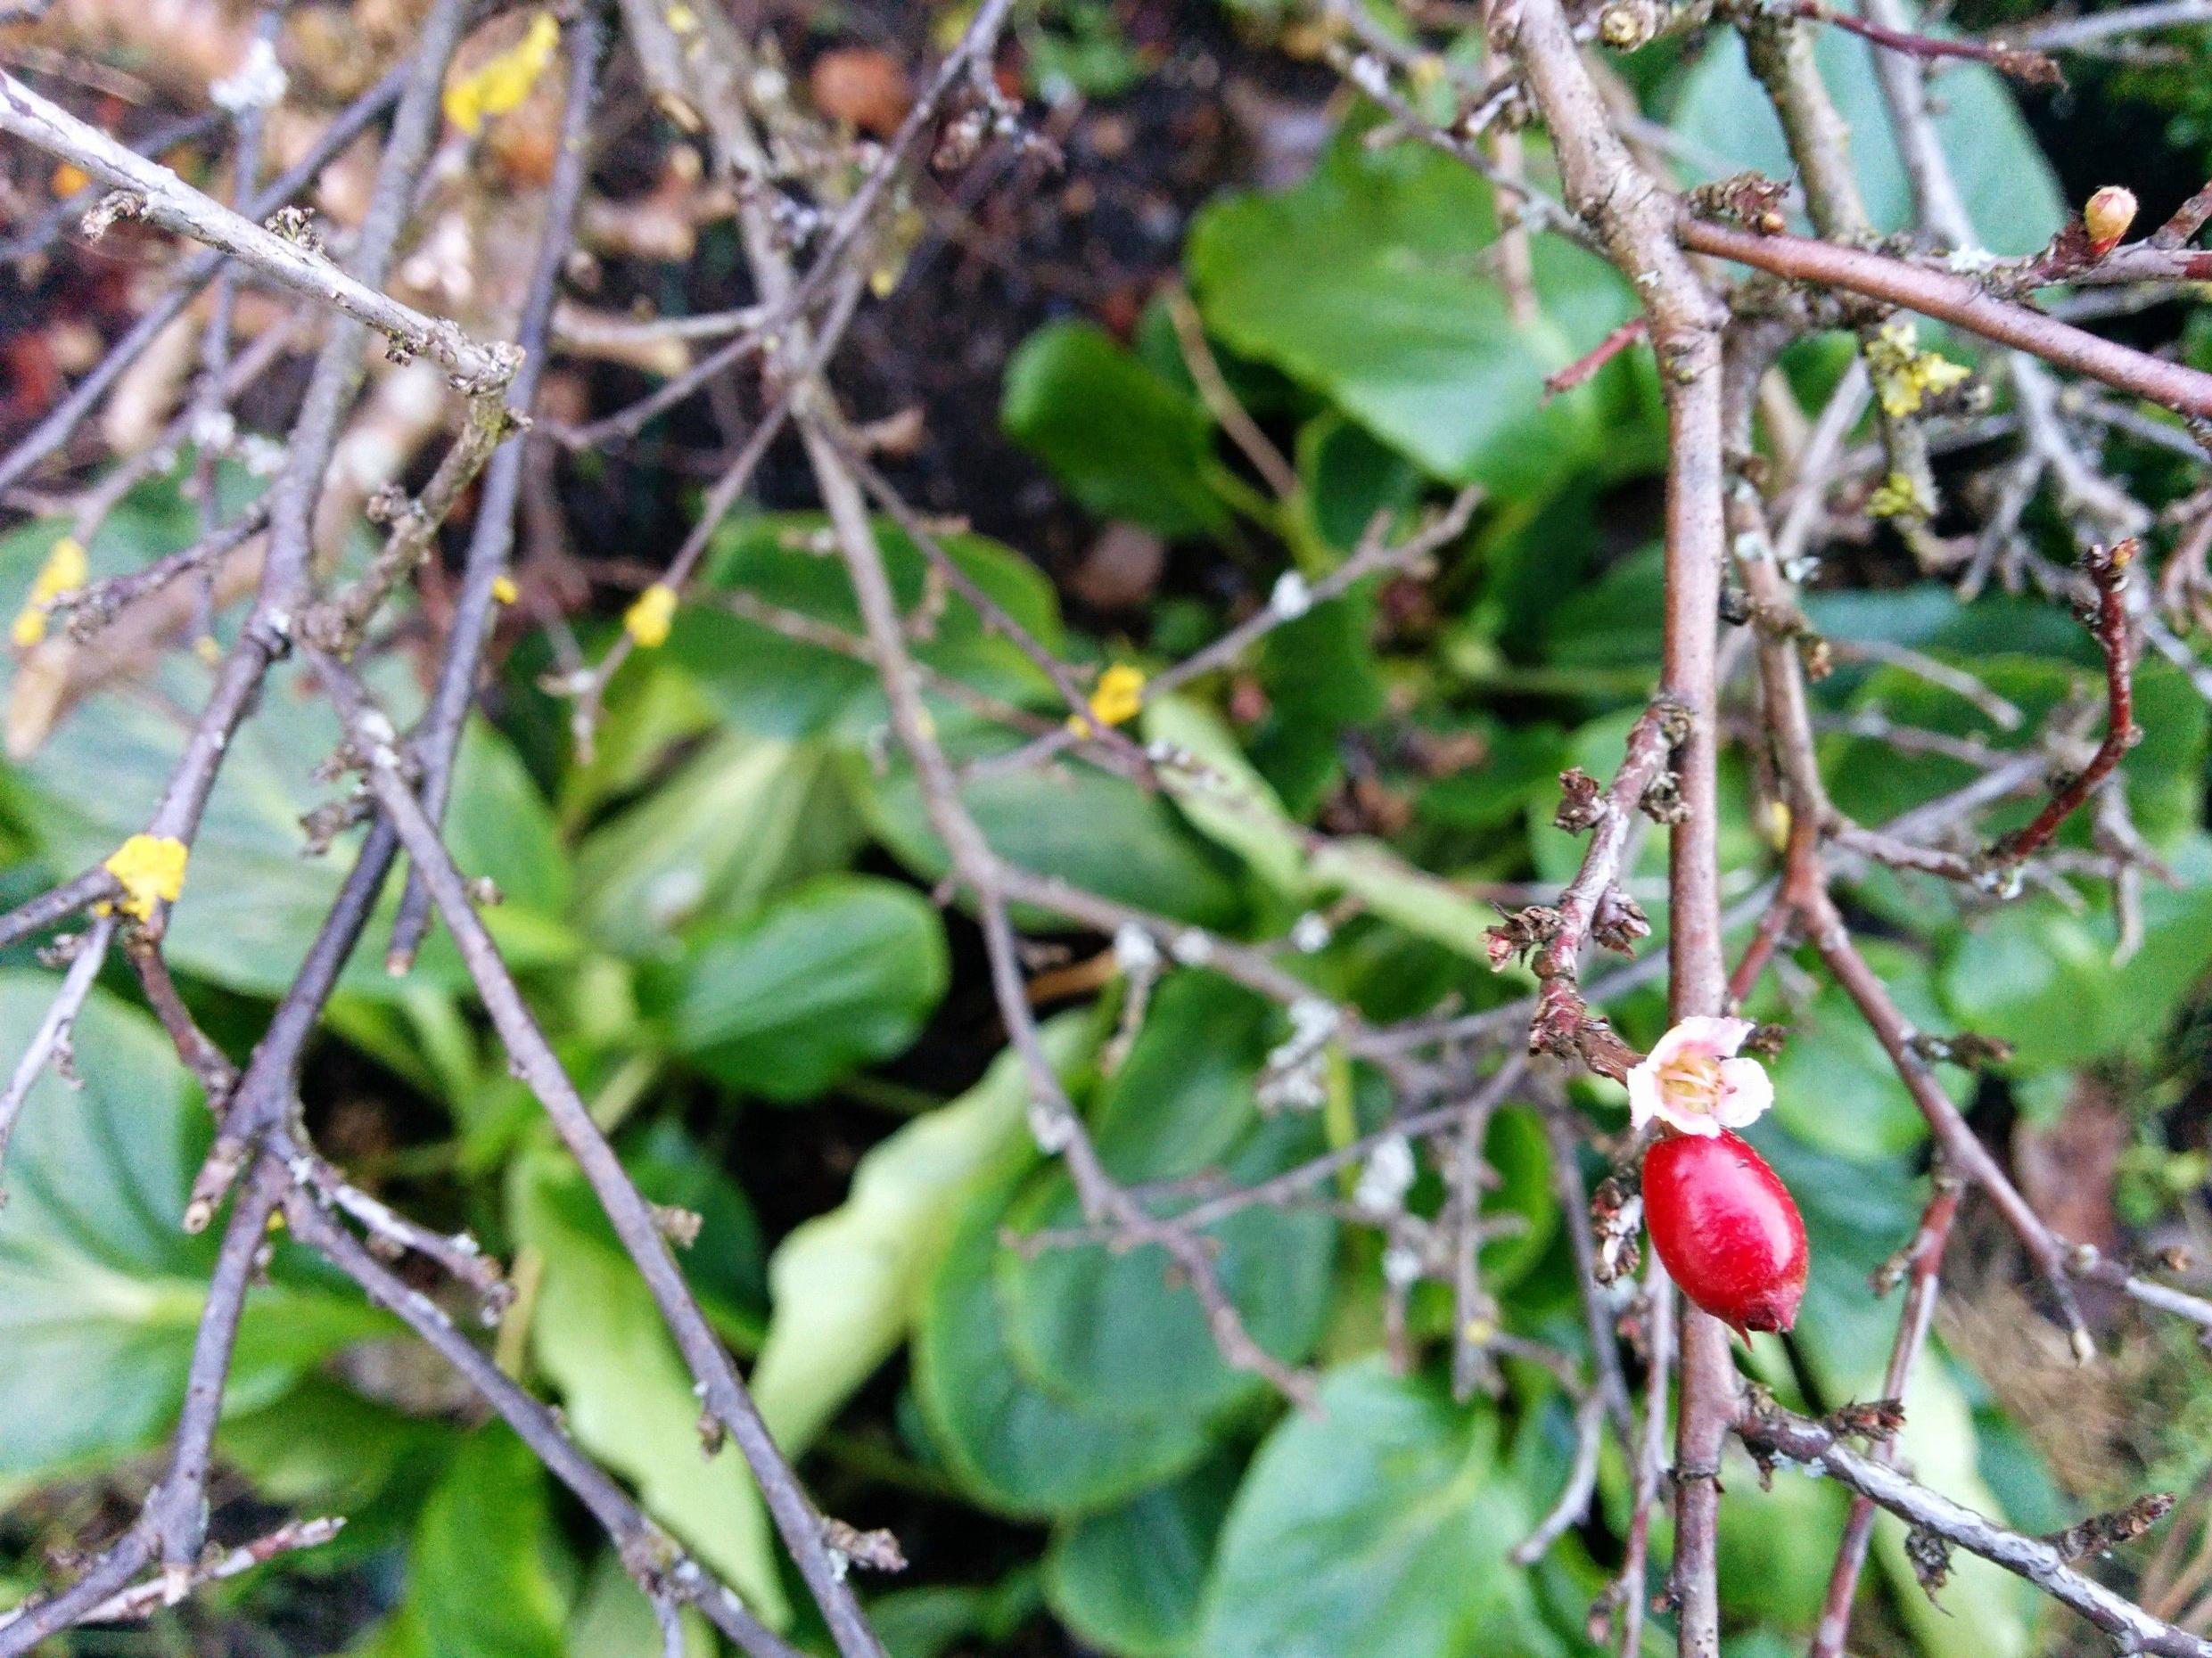 identification - Identify deciduous shrub with small red berries and ...